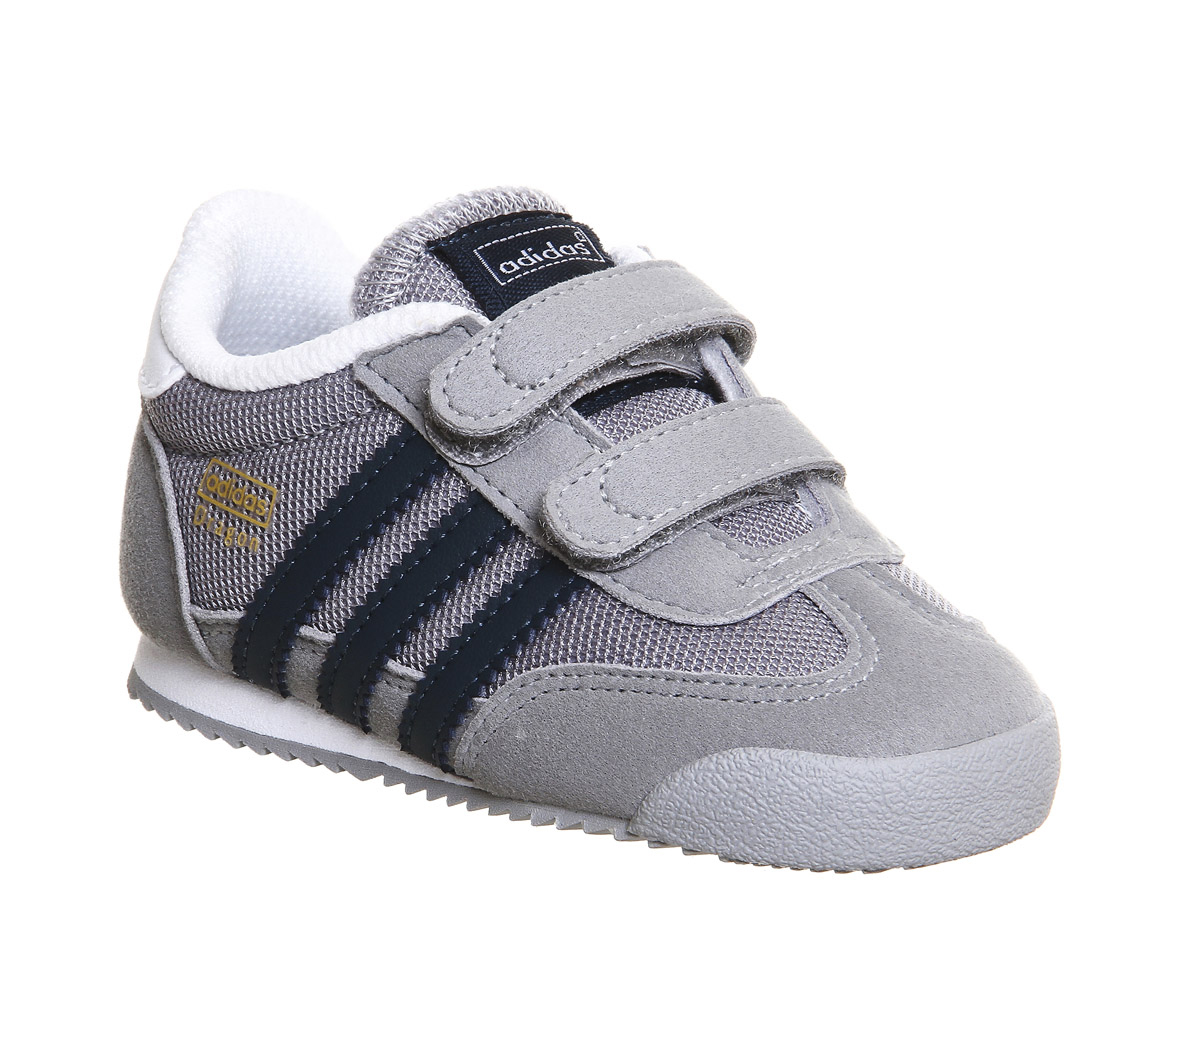 childrens adidas dragon trainers cheap nike shoes online